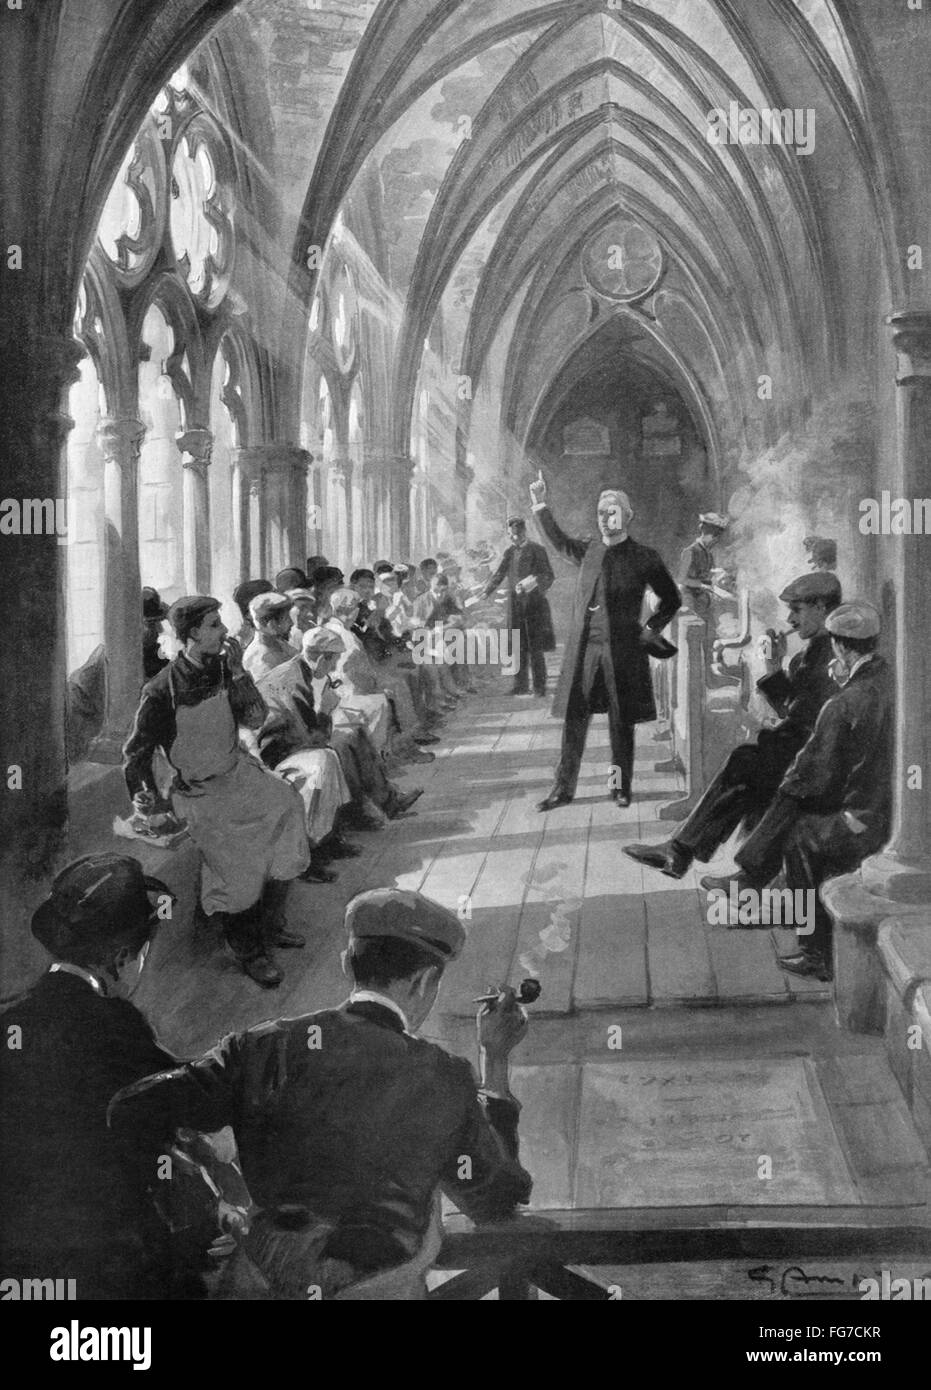 ALBERT BASIL WILBERFORCE /n(1841-1916). Archdeacon of Westminster. Wilberforce holding a dinner-time service for the workmen of the coronation of King Edward VII at Westminster Abbey, May 1902. Contemporary English illustration. Stock Photo